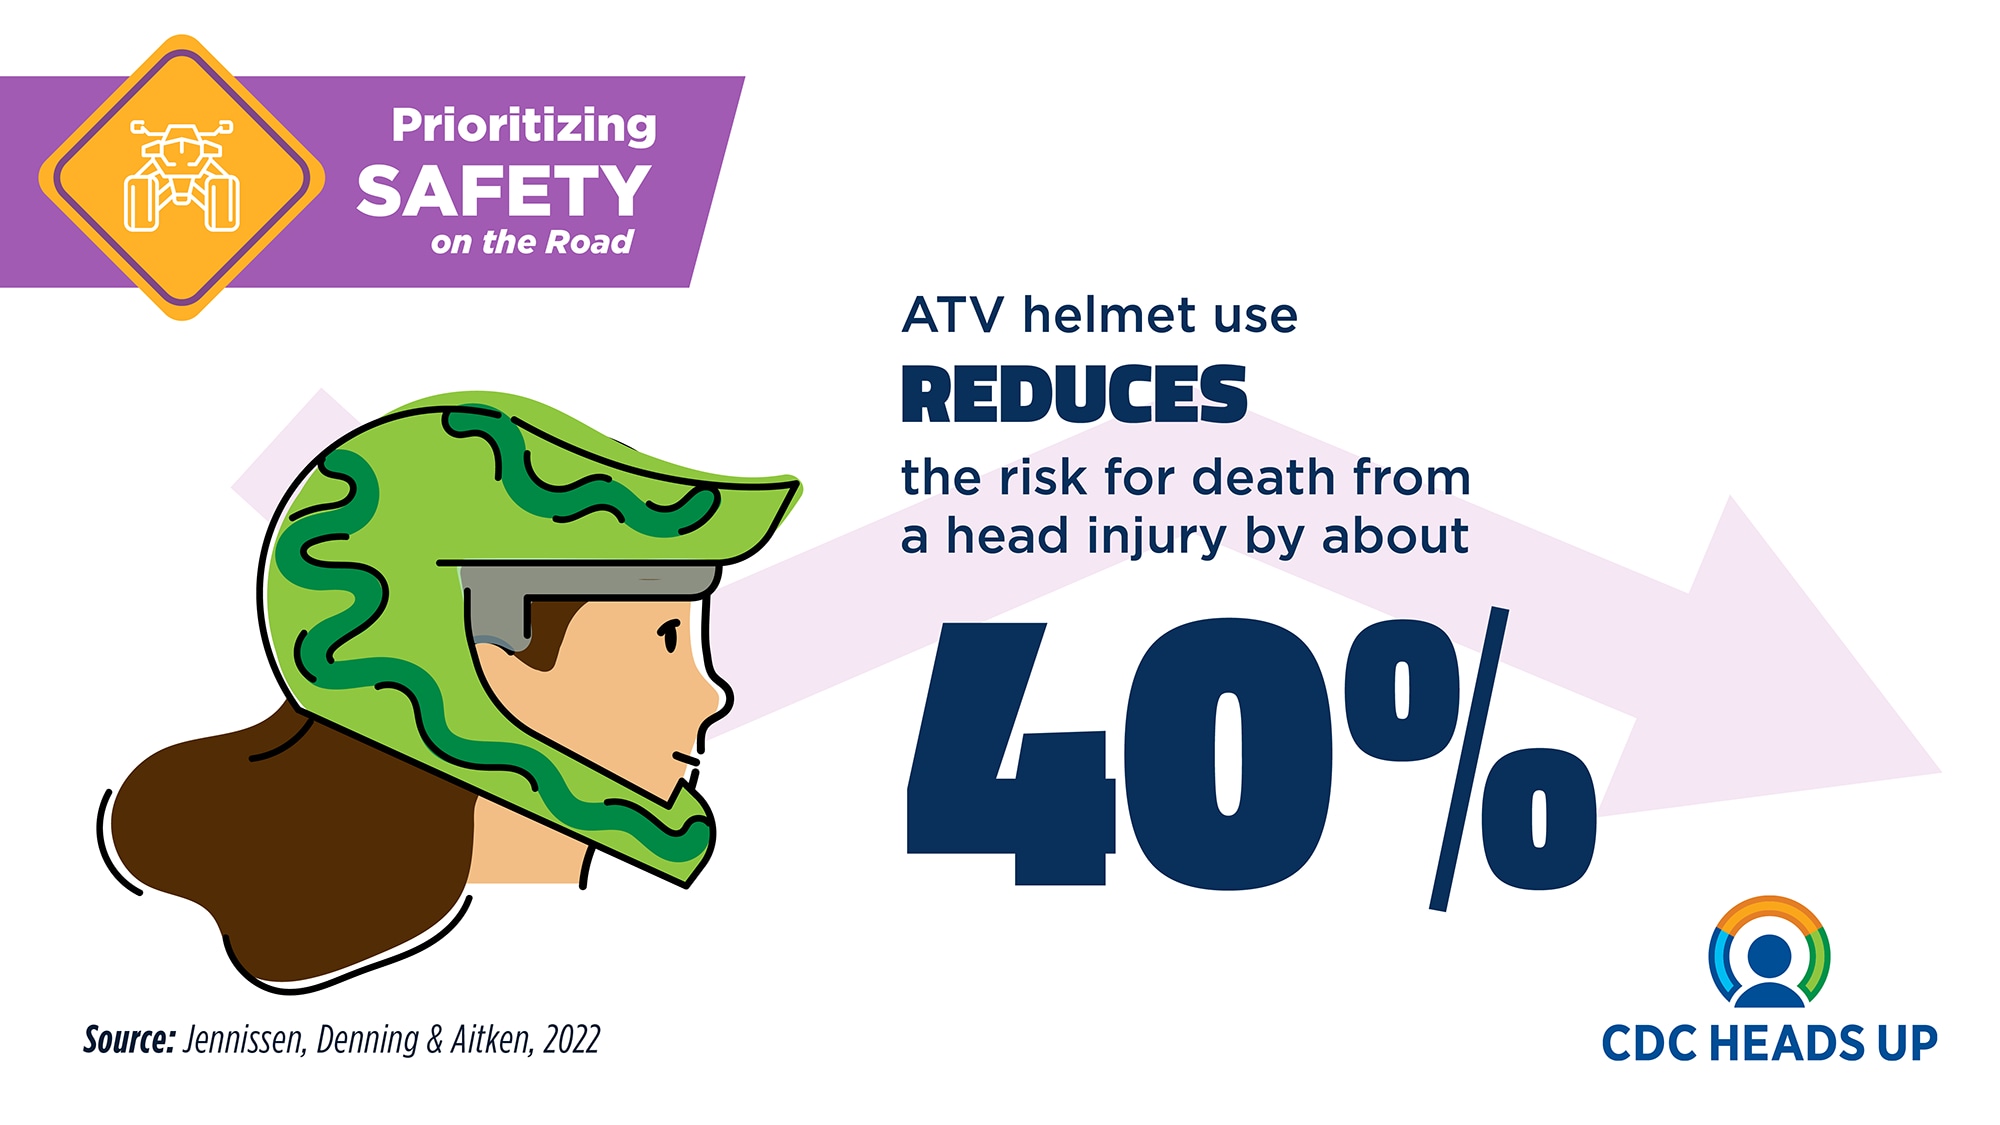 ATV helmet use reduces the risk of death from head injury by about 40%.